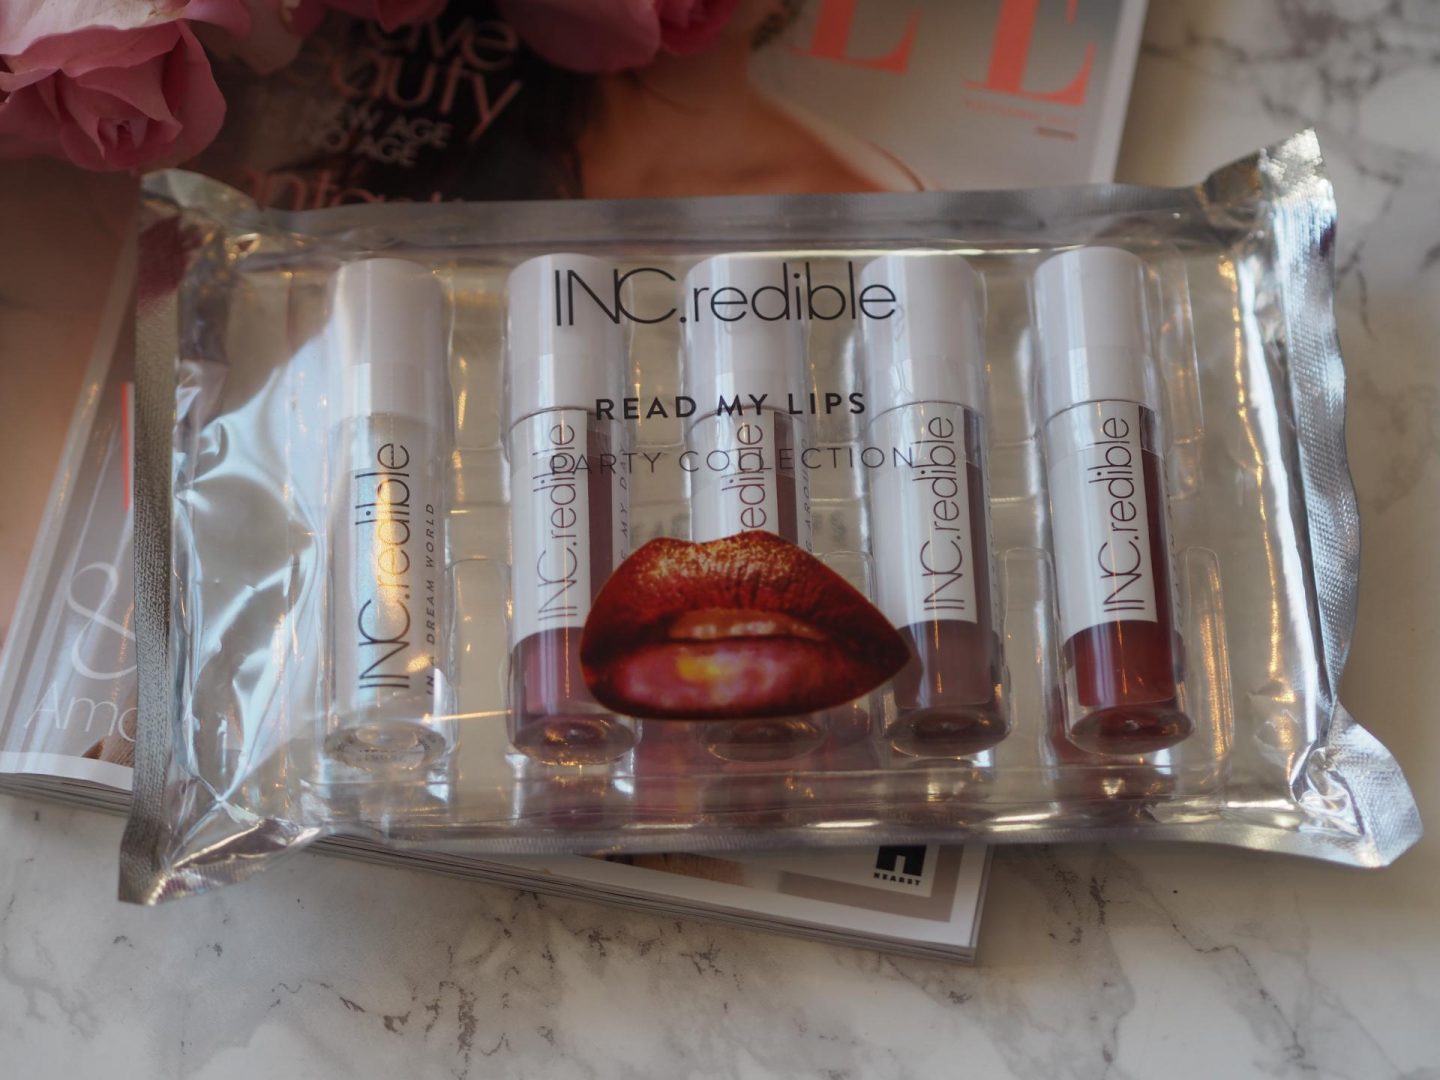 Inc.redible Cosmetics Read My Lips Party Collection